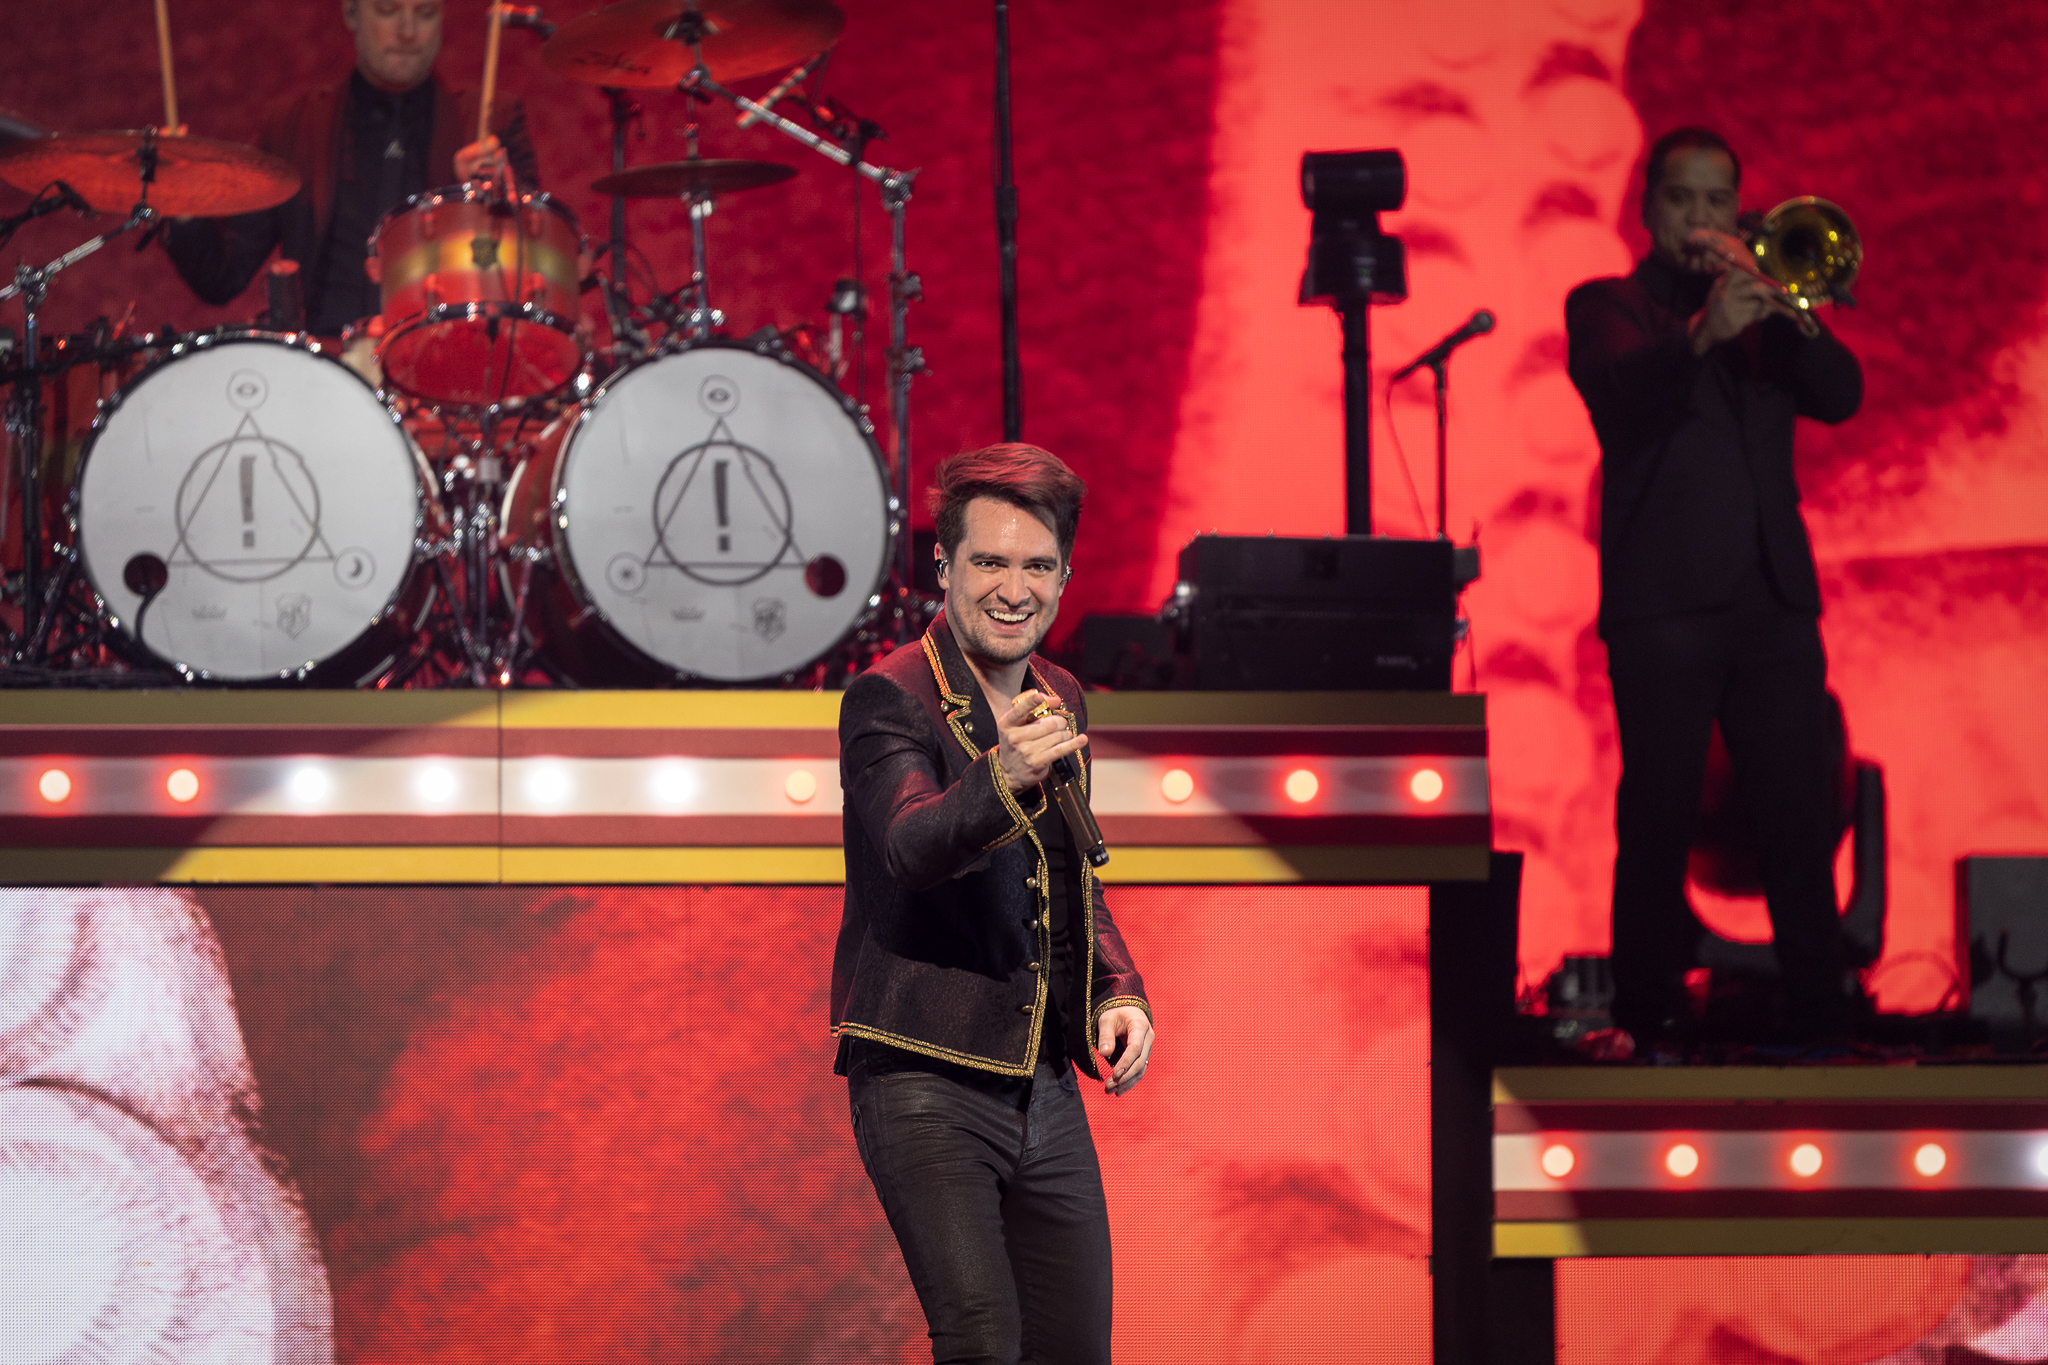 Panic! at the Disco perform at Moda Center in Portland, Oregon on October 15, 2022.